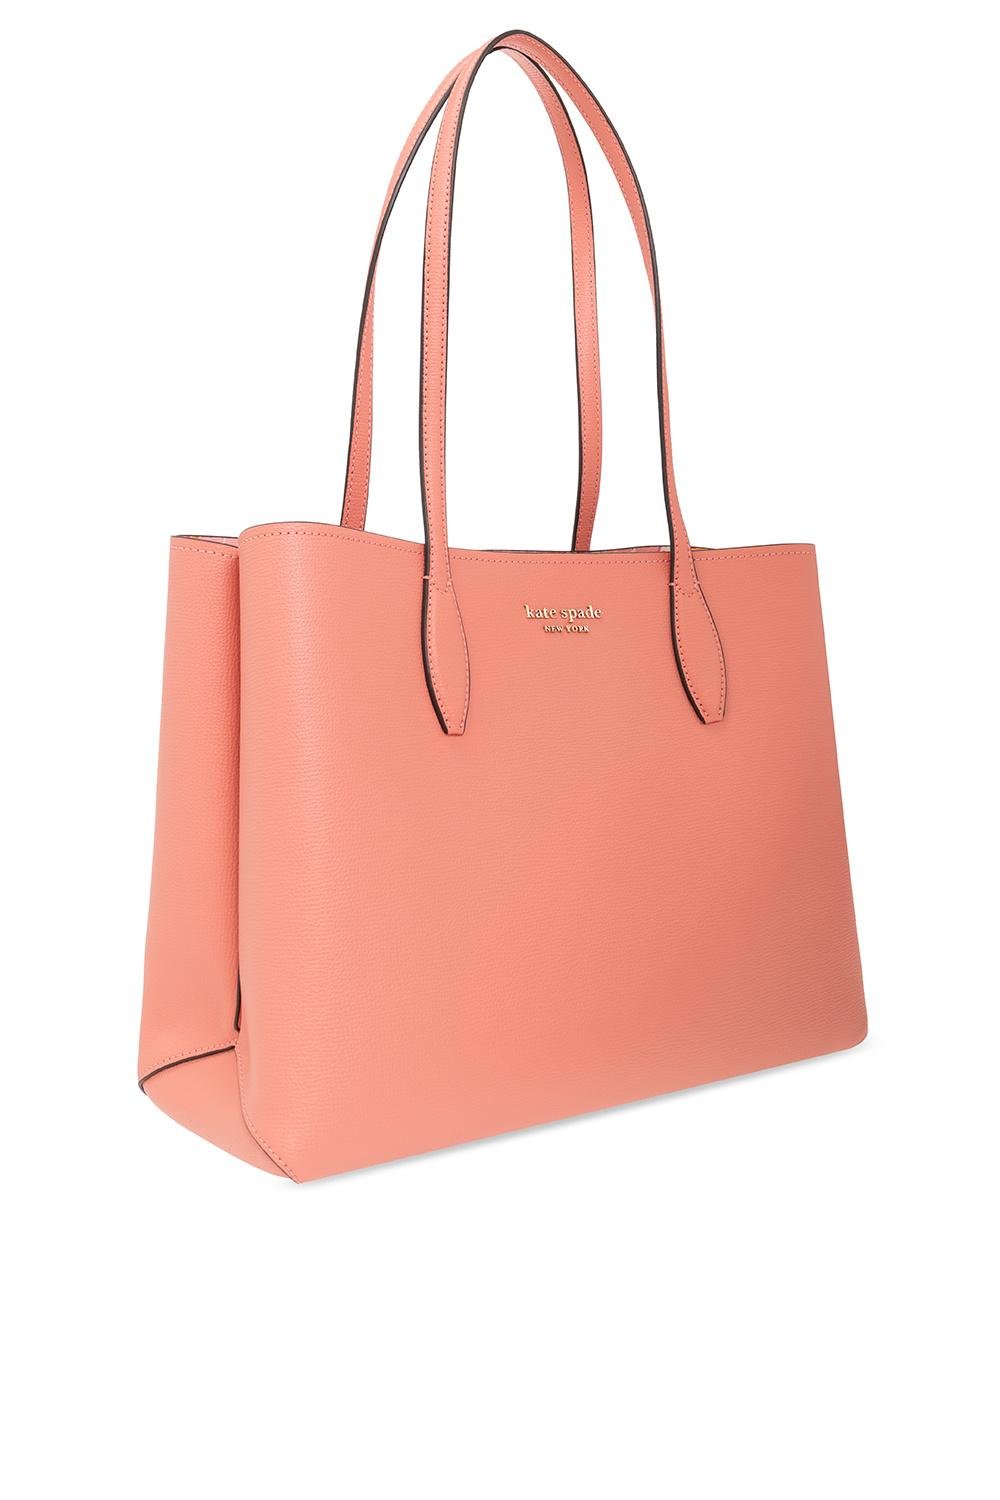 Kate Spade All Day Large Zip Top Tote - Shoppers 